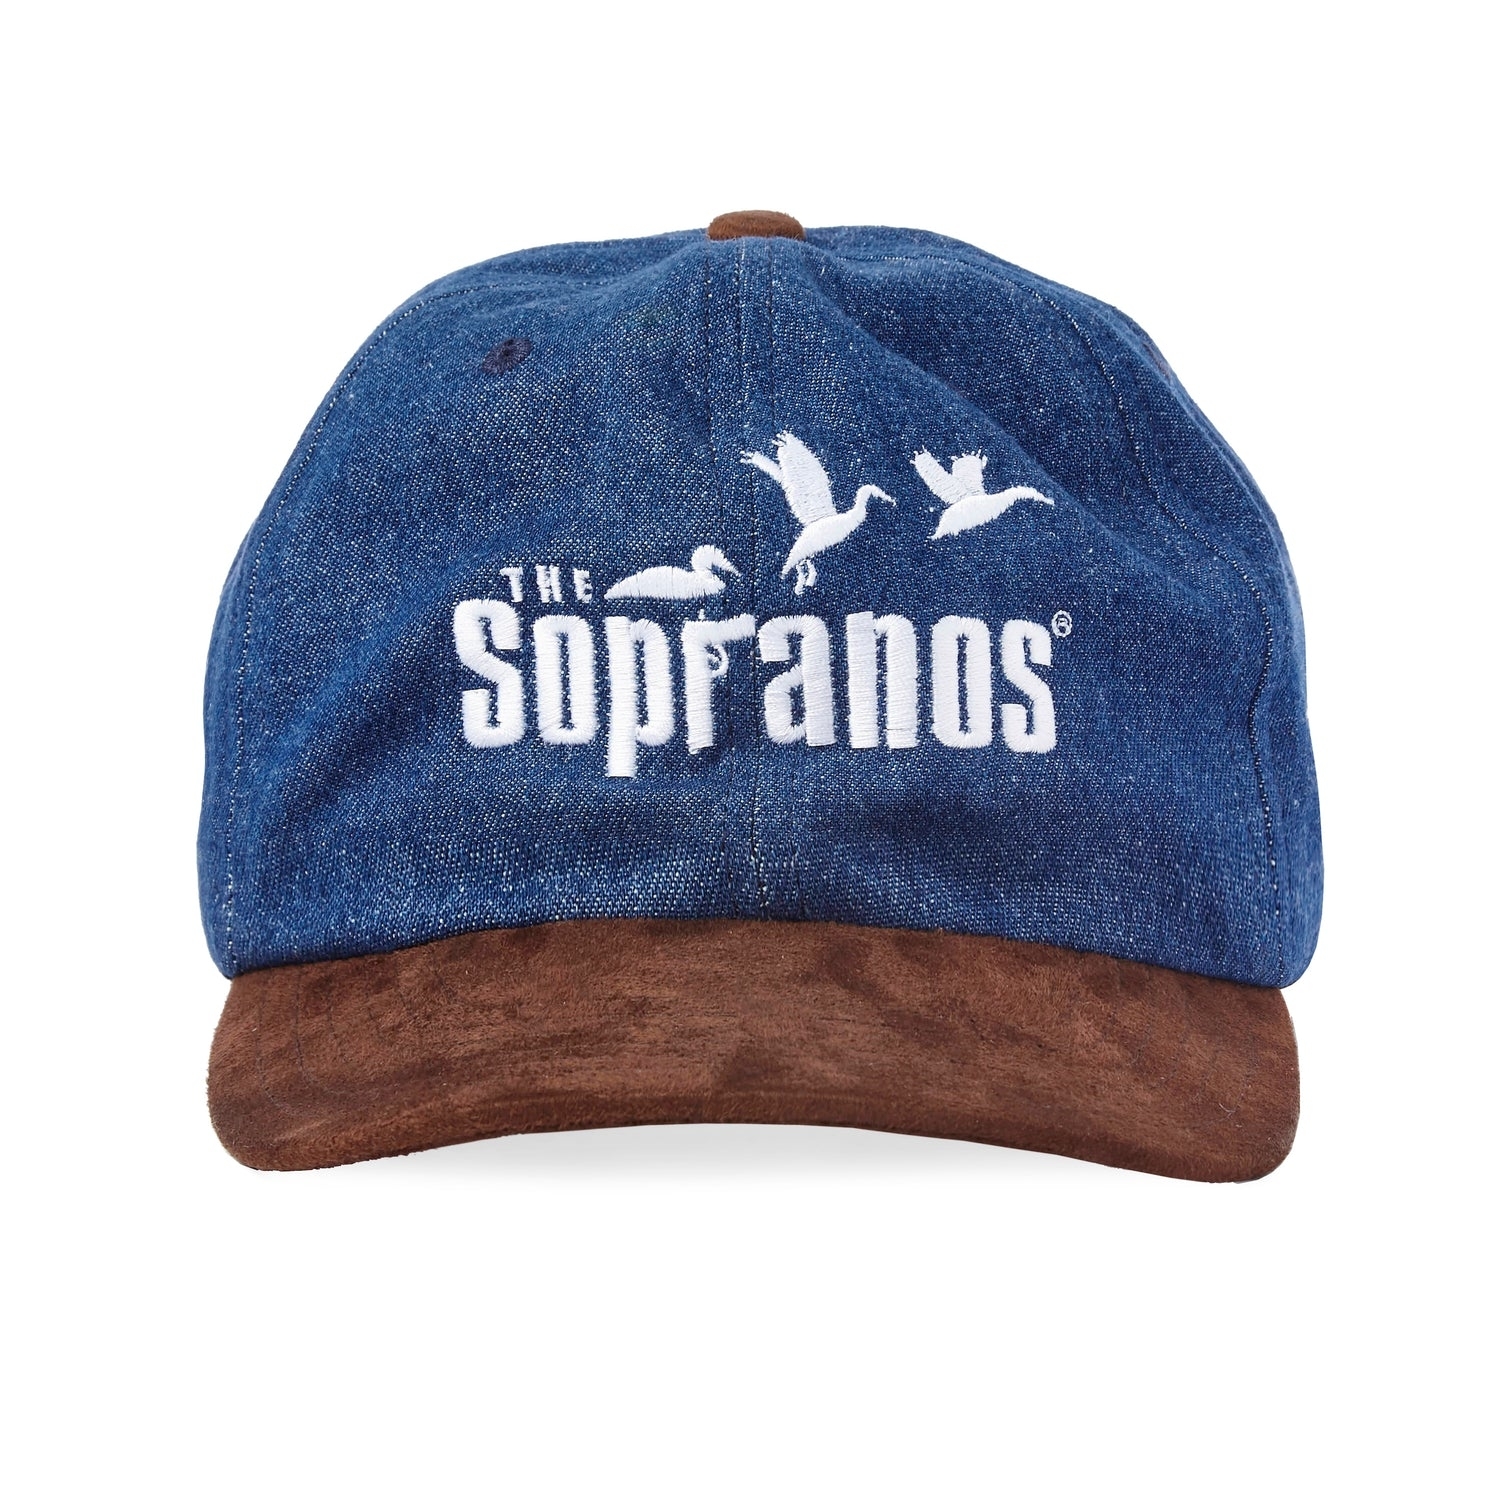 A denim cap with a brown suede brim, featuring &quot;The Sopranos&quot; logo and three bird silhouettes